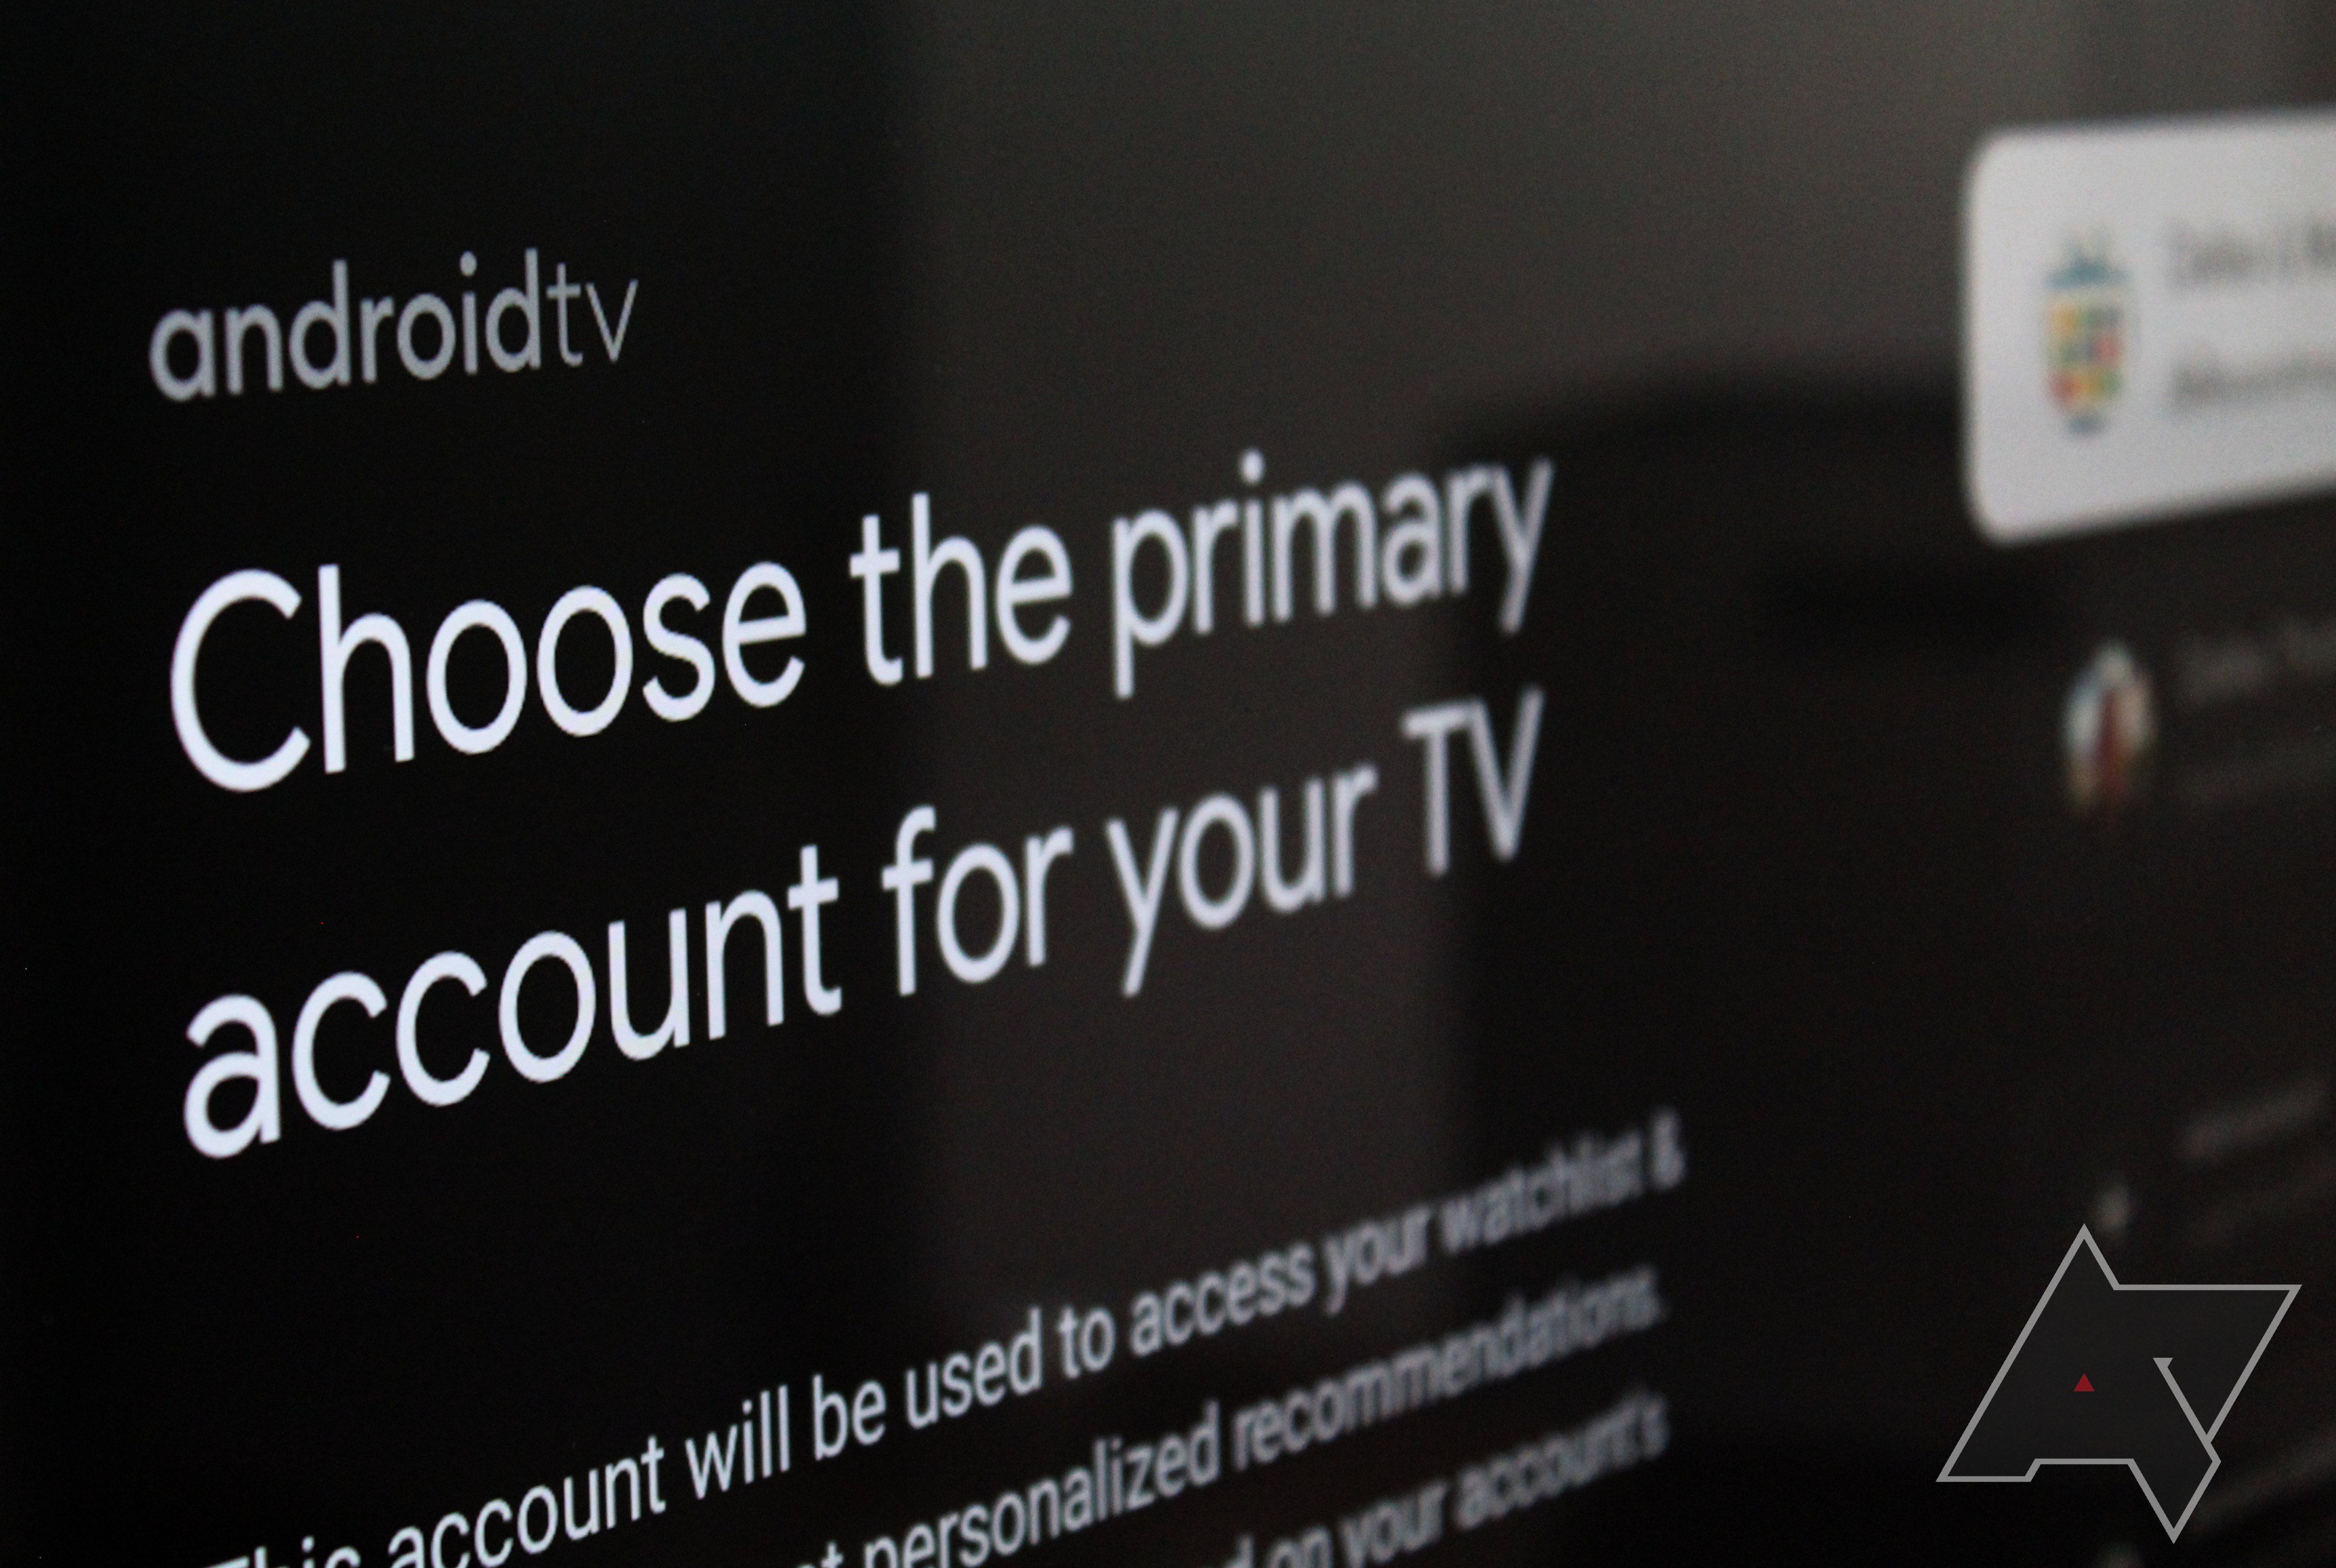 Google explains how it fixed the recent Android TV security vulnerability